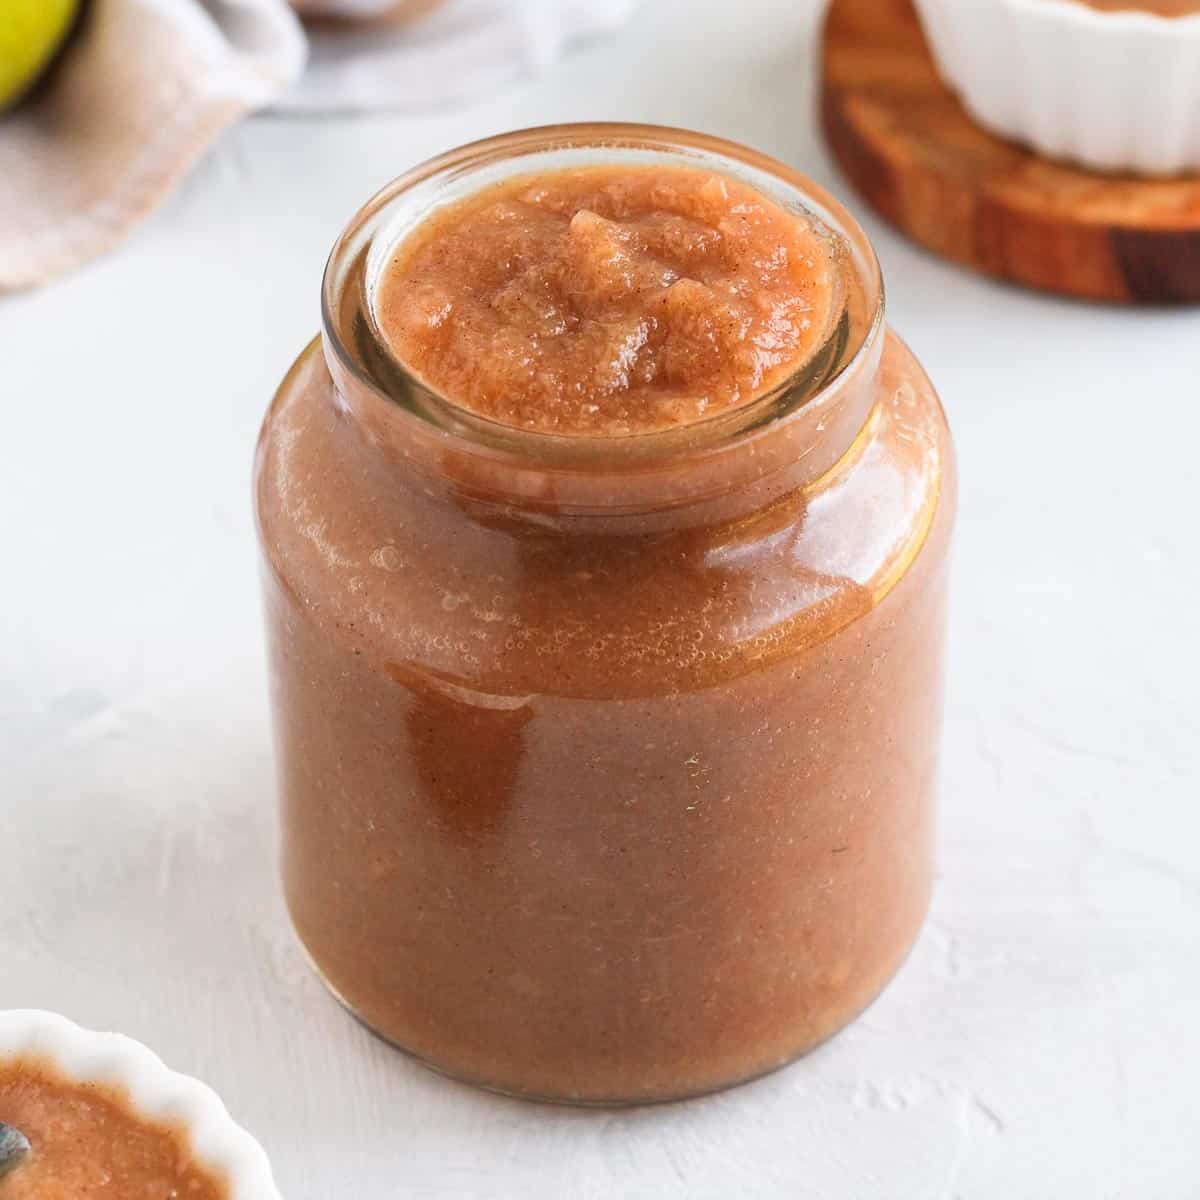 Close up on the pear sauce in a glass jar.